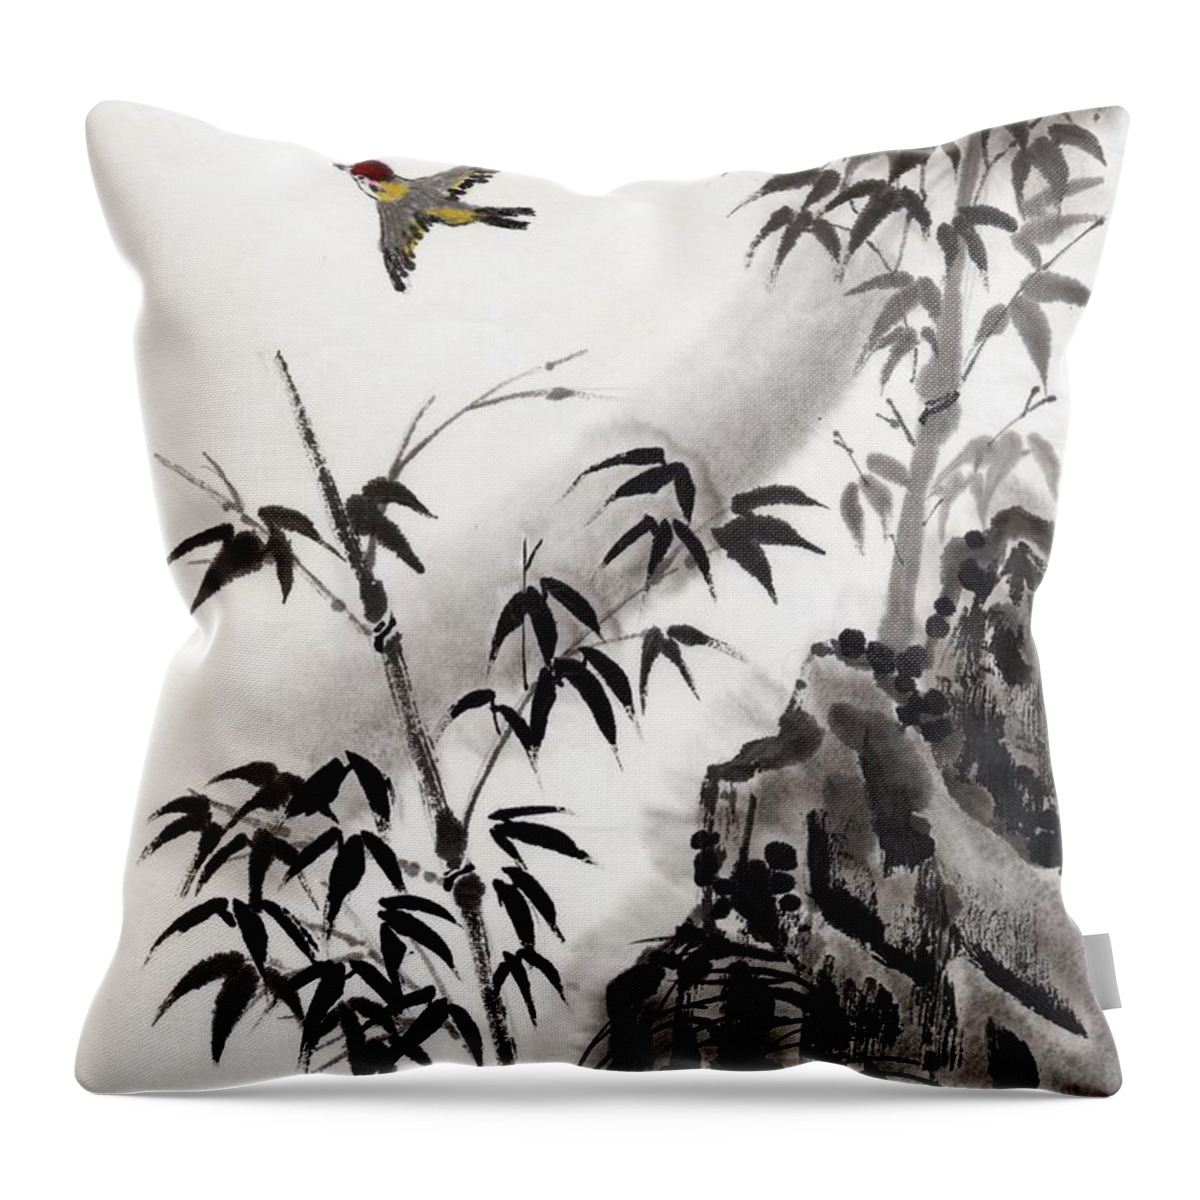 Scenics Throw Pillow featuring the digital art A Bird And Bamboo Leaves, Ink Painting by Daj